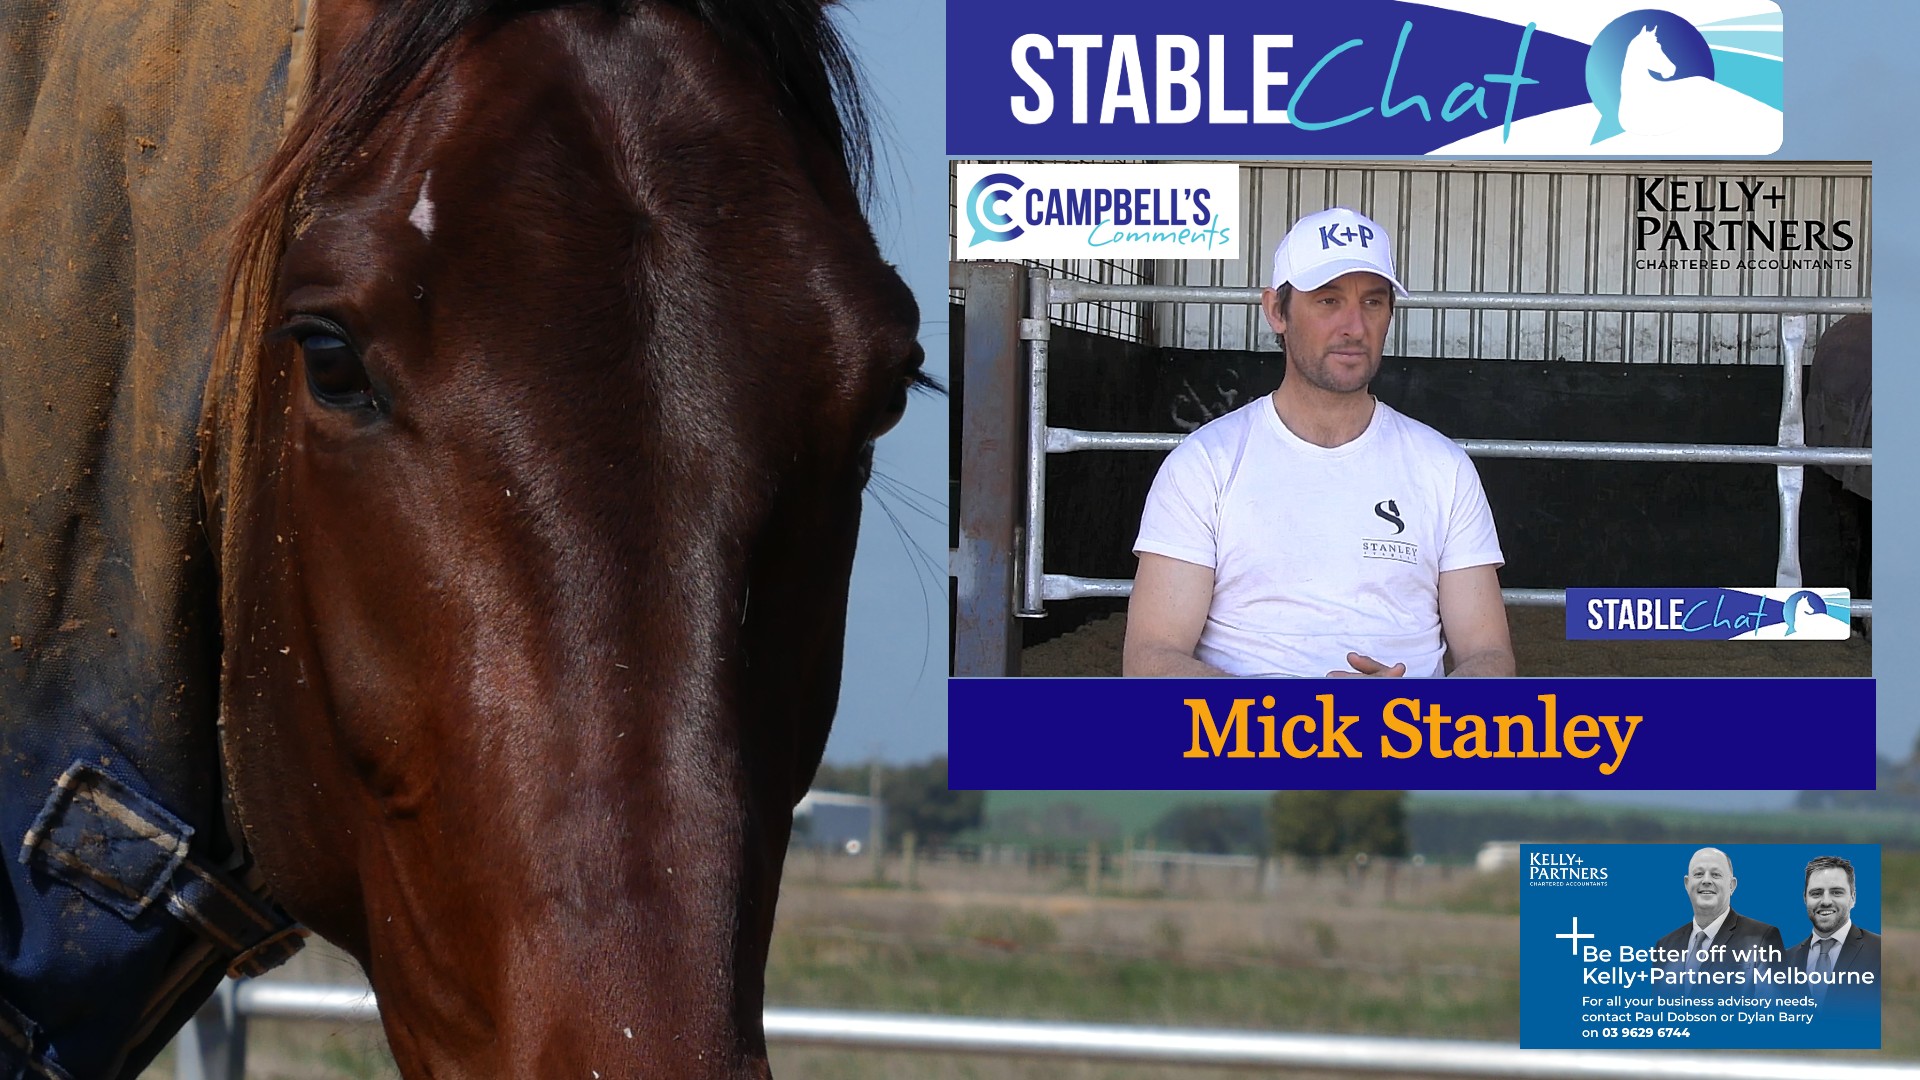 You are currently viewing 48: Stable Chat Mick Stanley